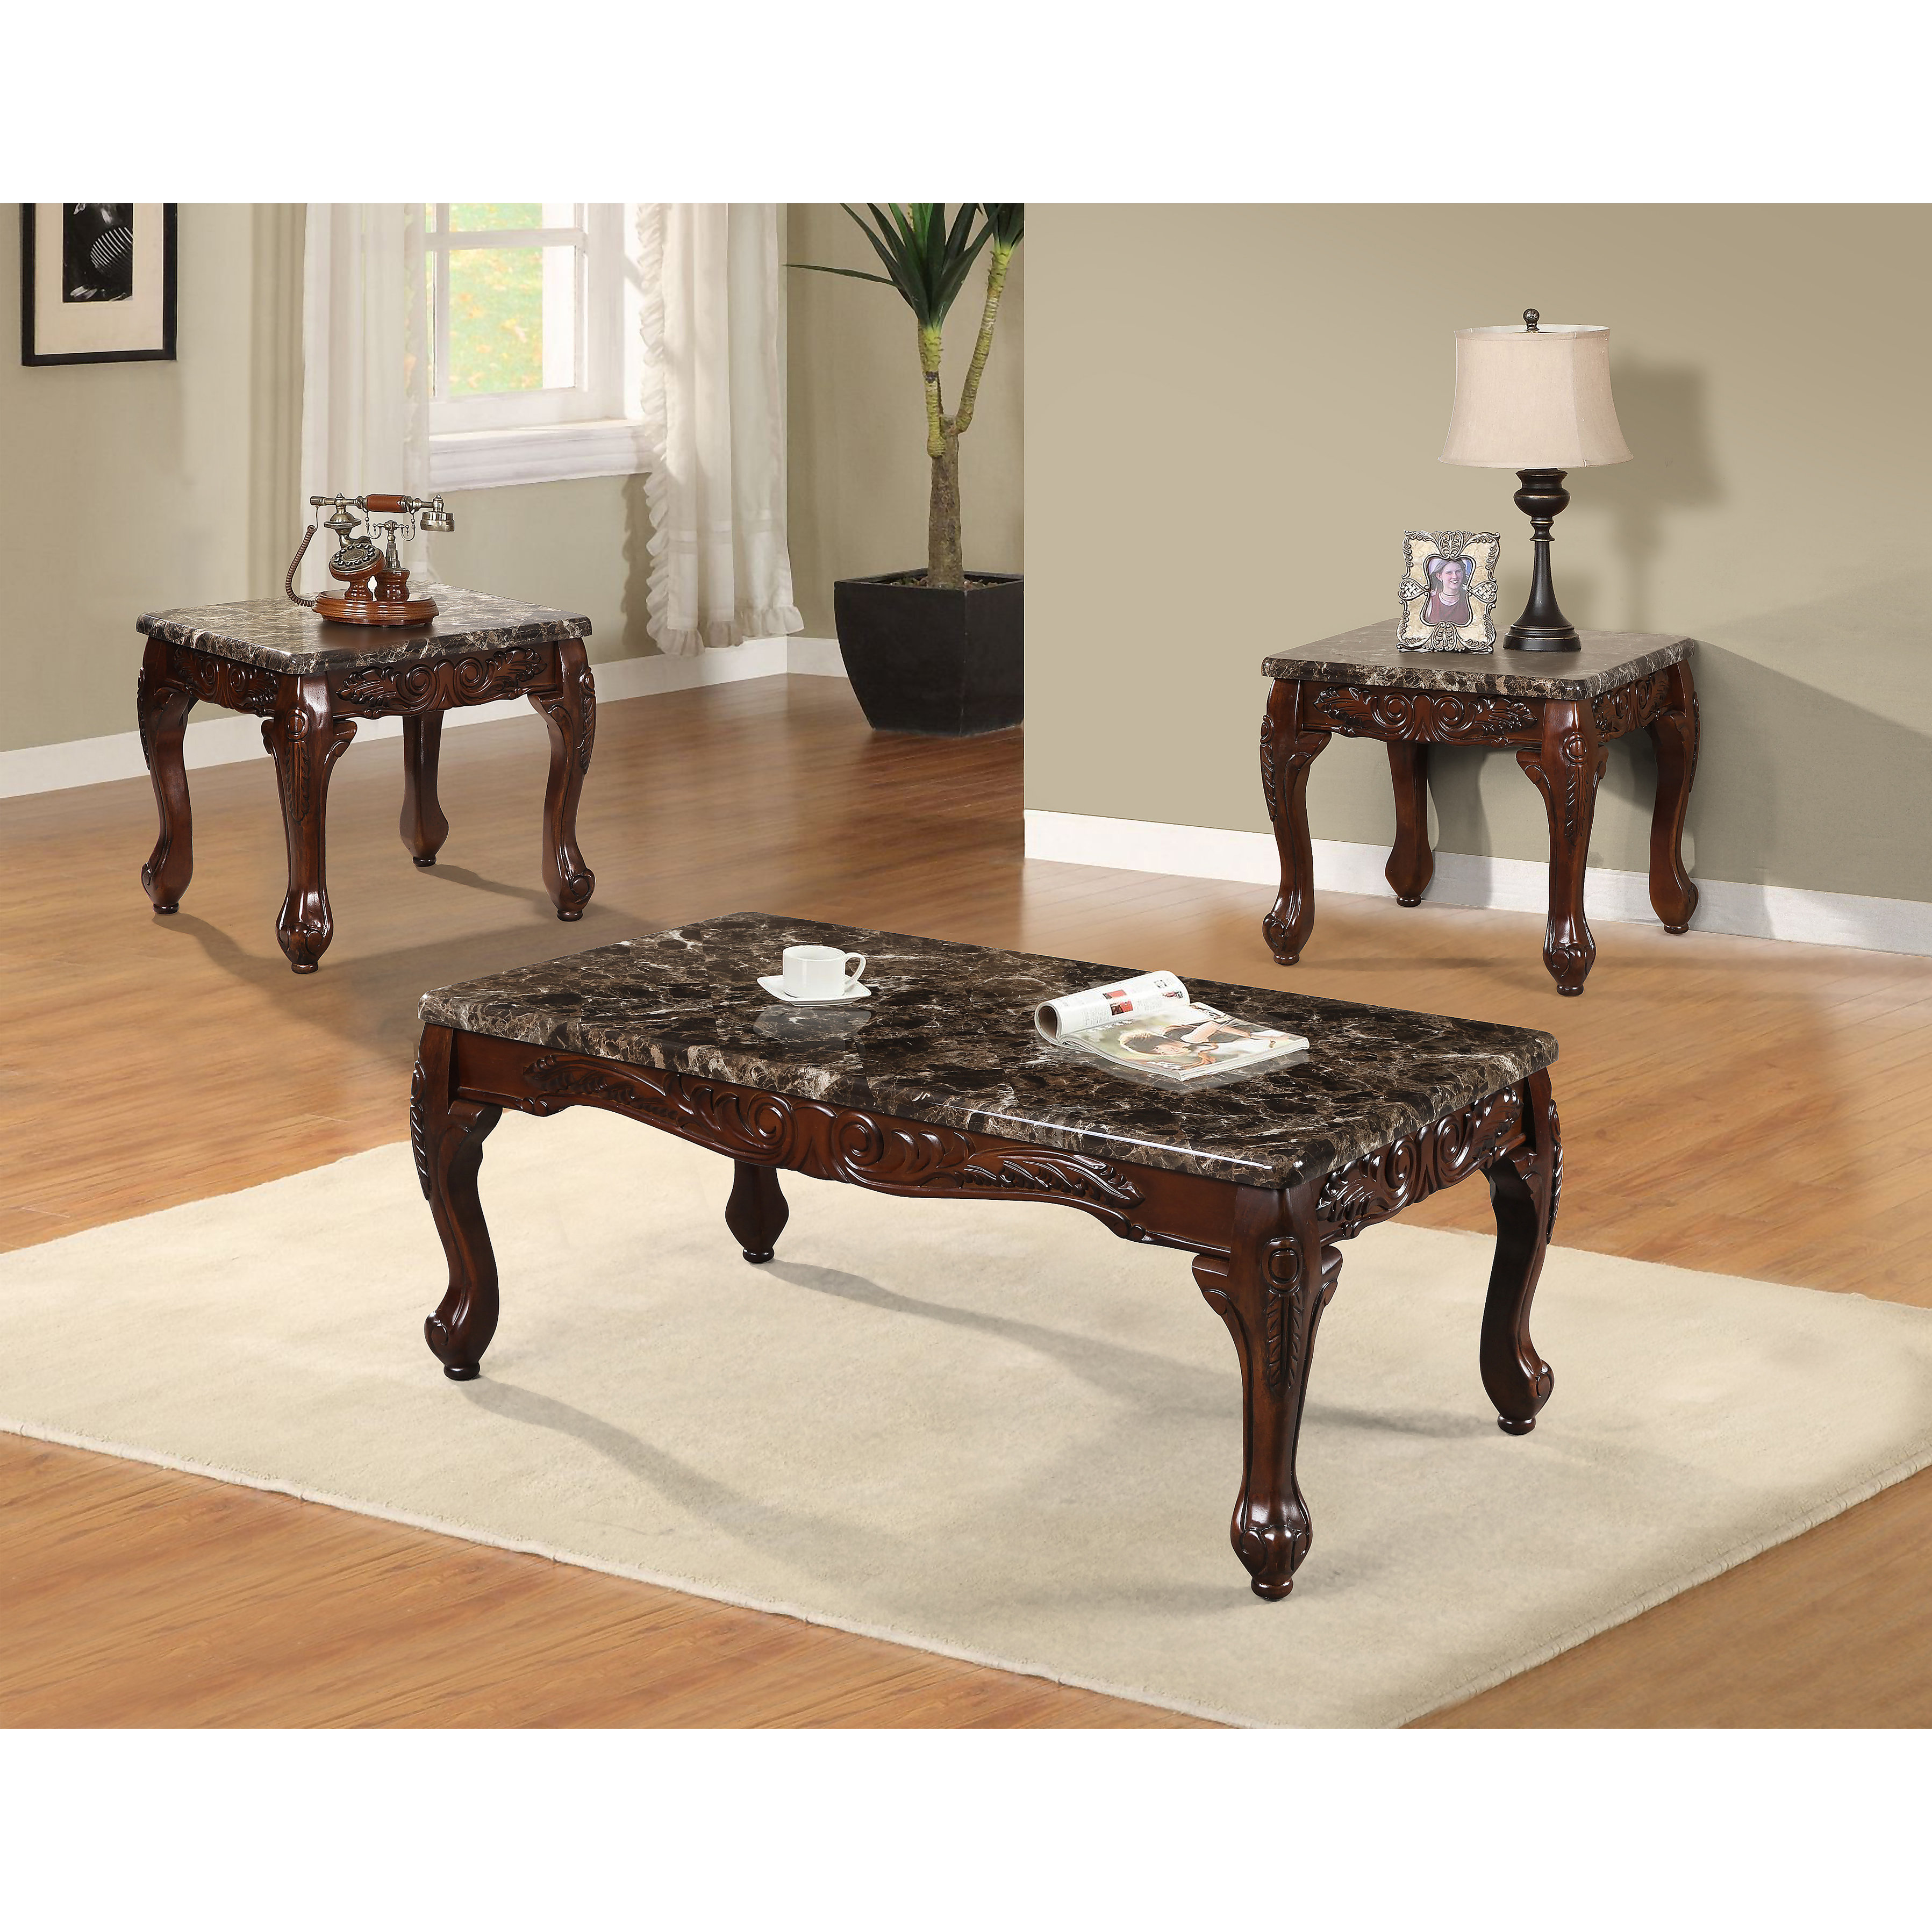 Best Quality Furniture 3 Piece Coffee Table Set & Reviews | Wayfair